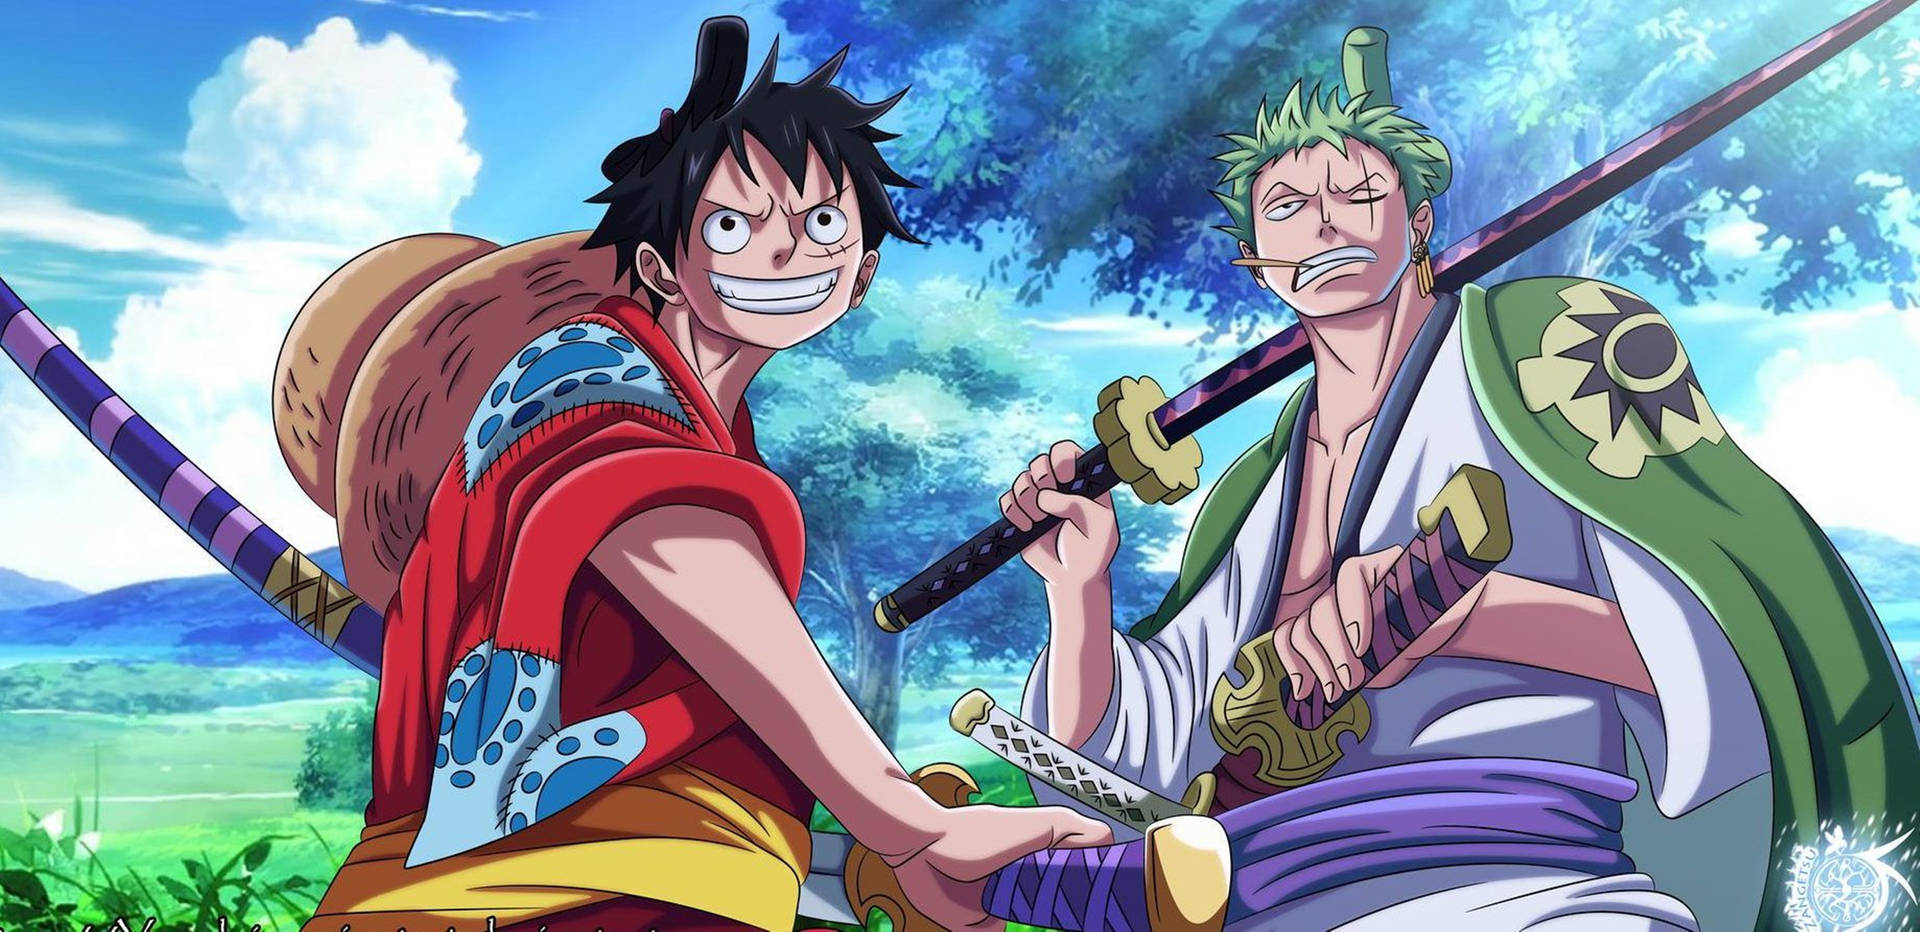 Zoro And Luffy One Piece Wano 4k Outfit